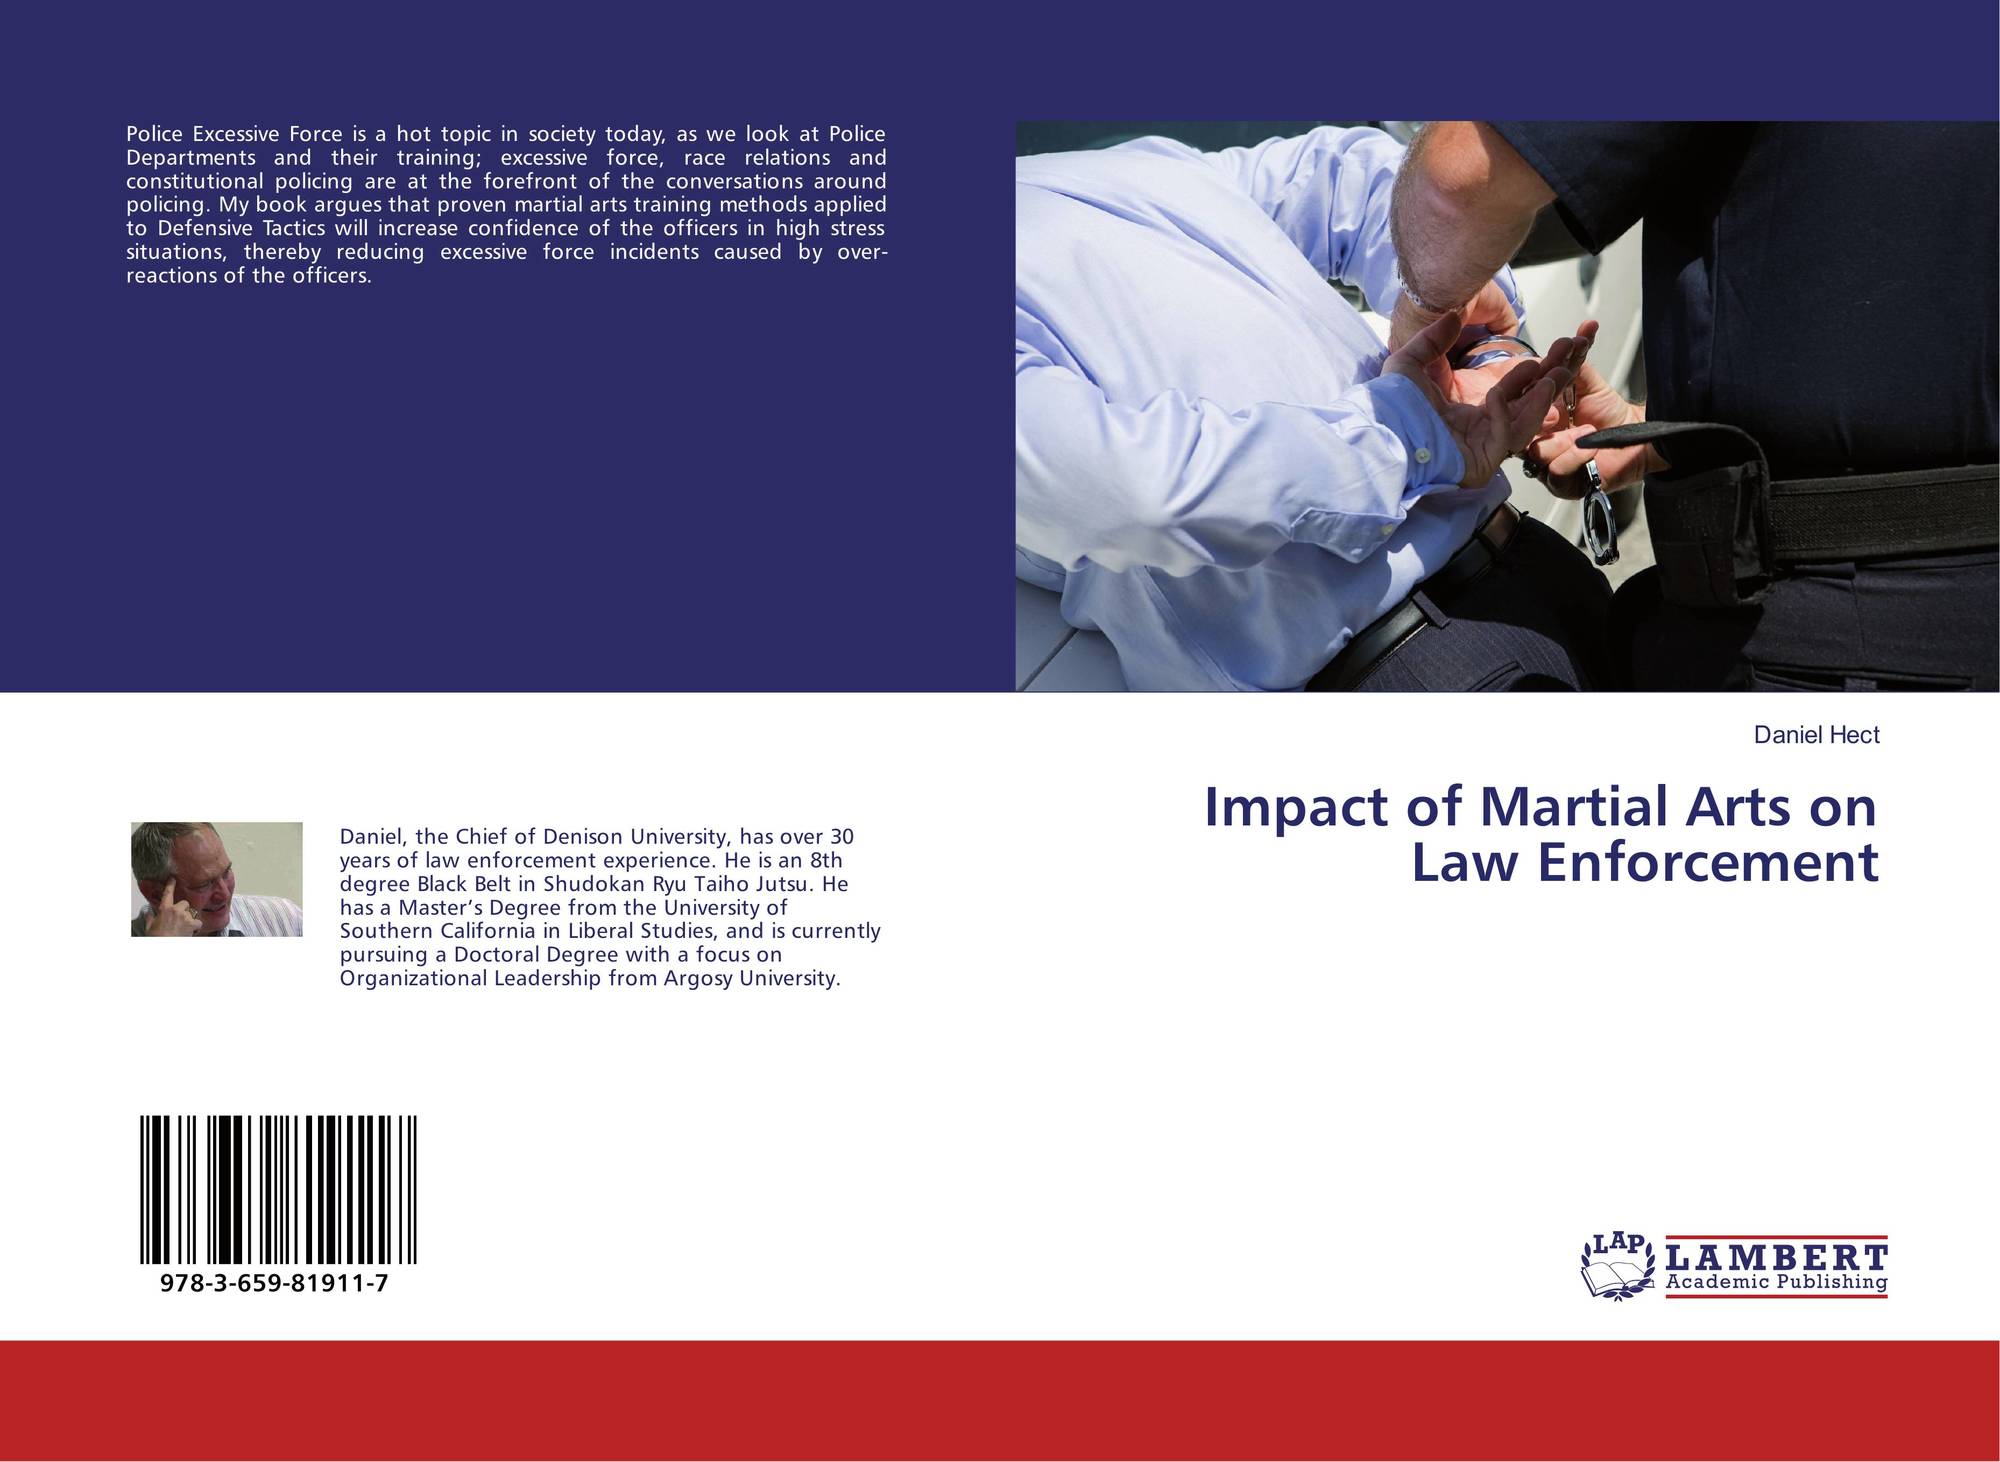 Police Enforcement Work And Its Effects On